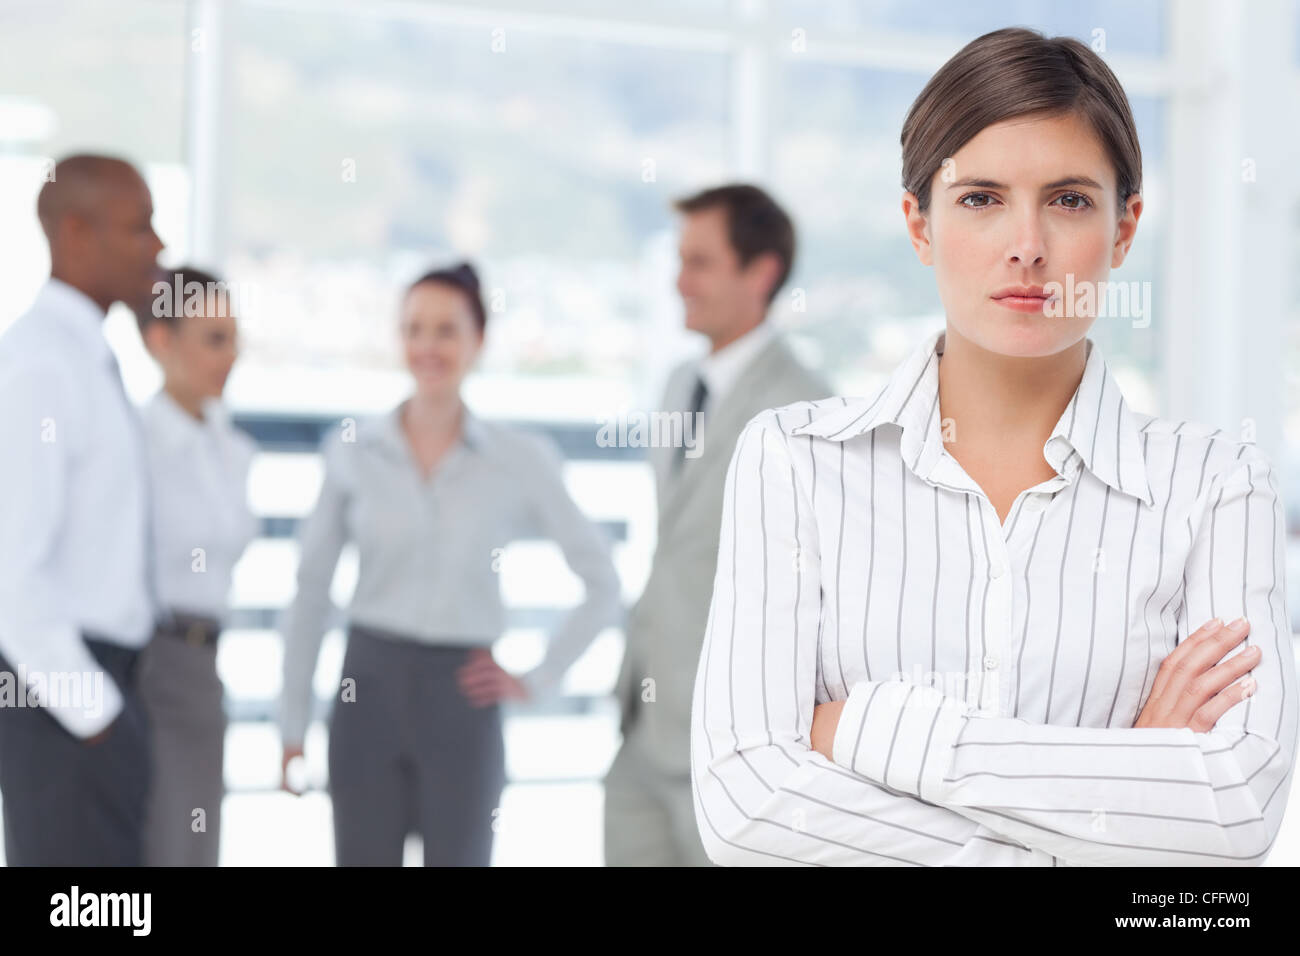 Saleswoman with arms folded and colleagues behind her Stock Photo